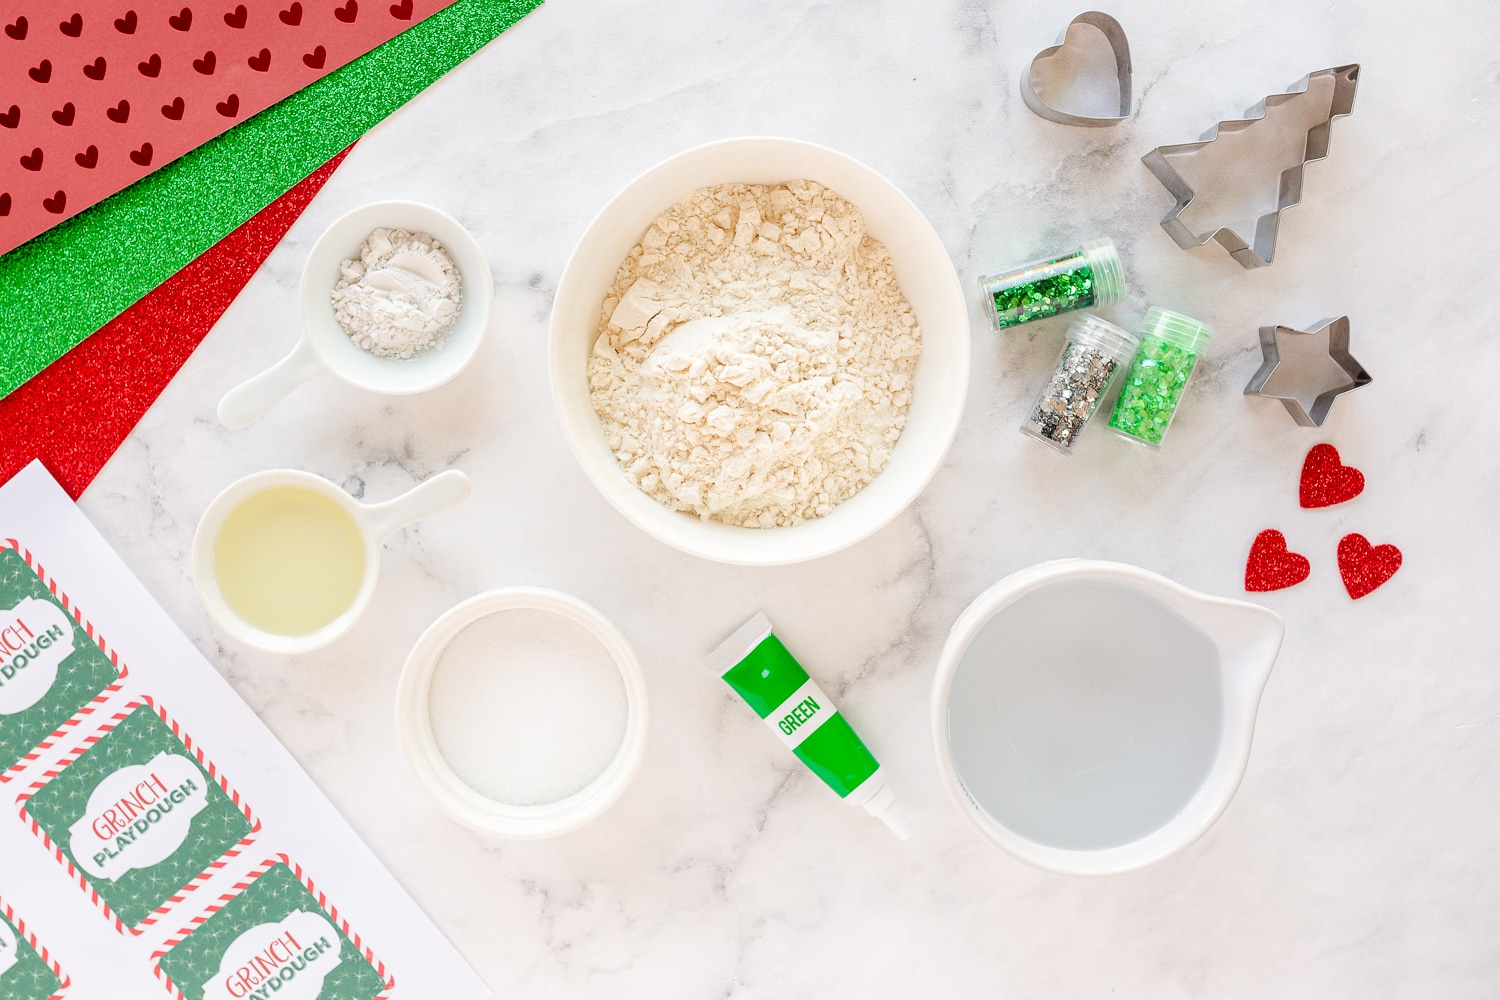 ingredients needed for grinch play dough in bowls